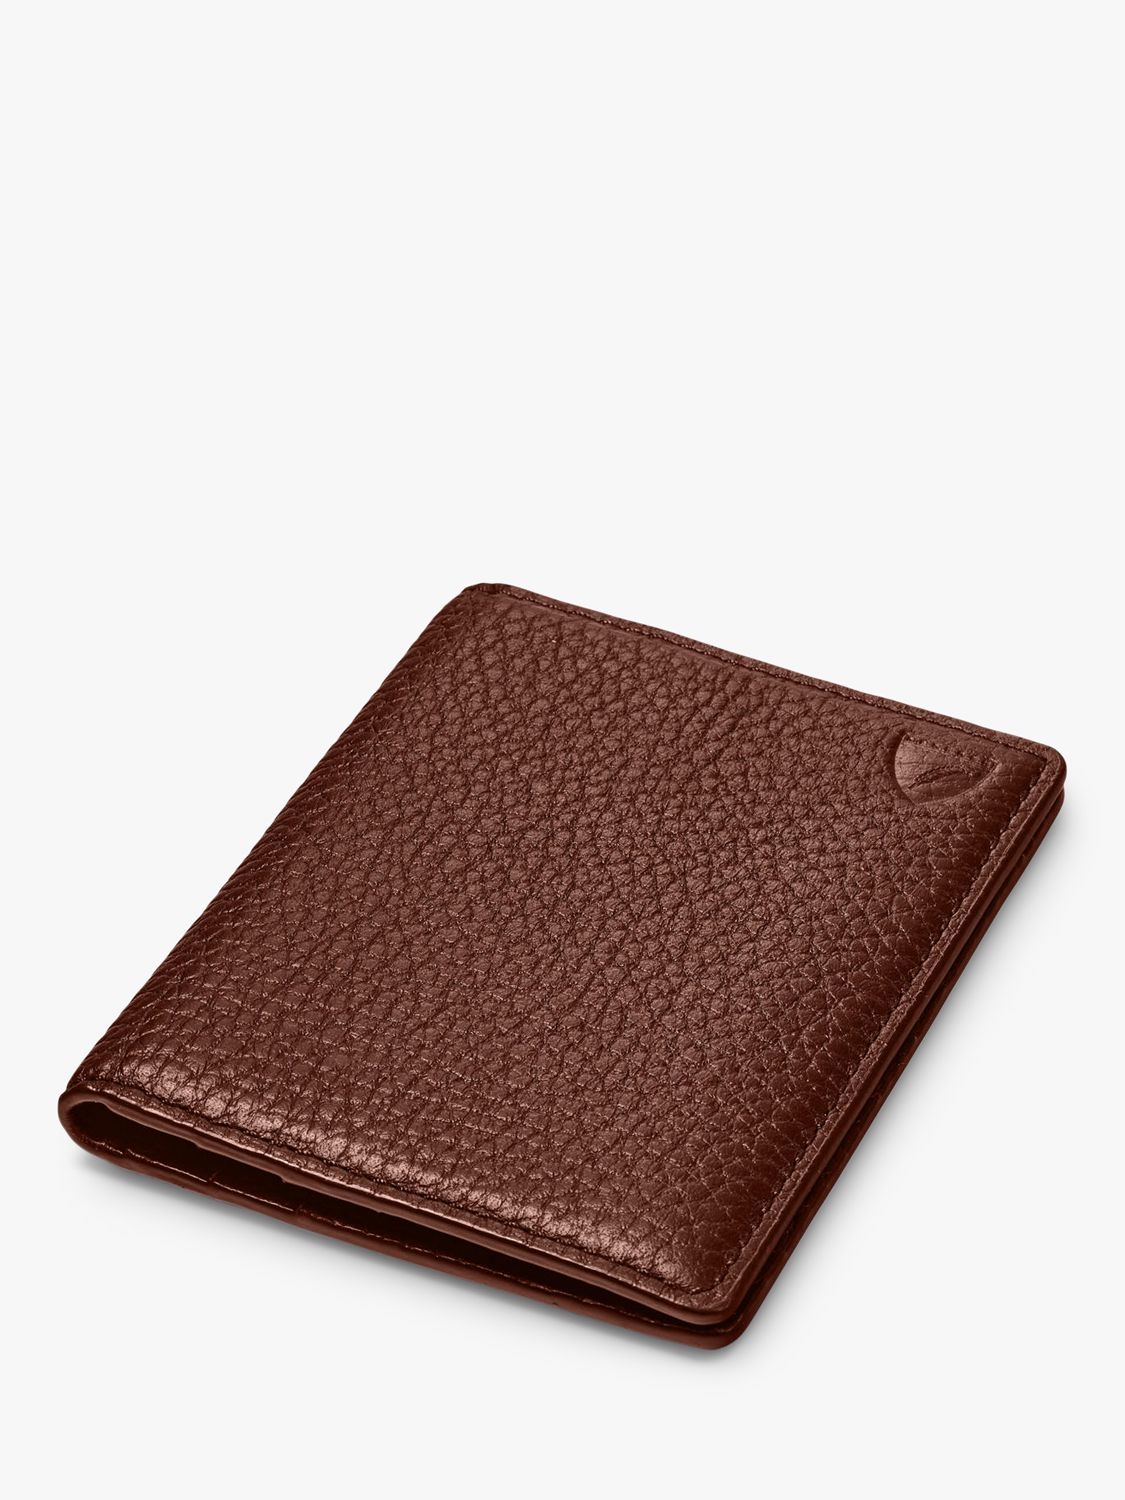 Aspinal of London Double Fold Pebble Leather Card Holder, Tobacco